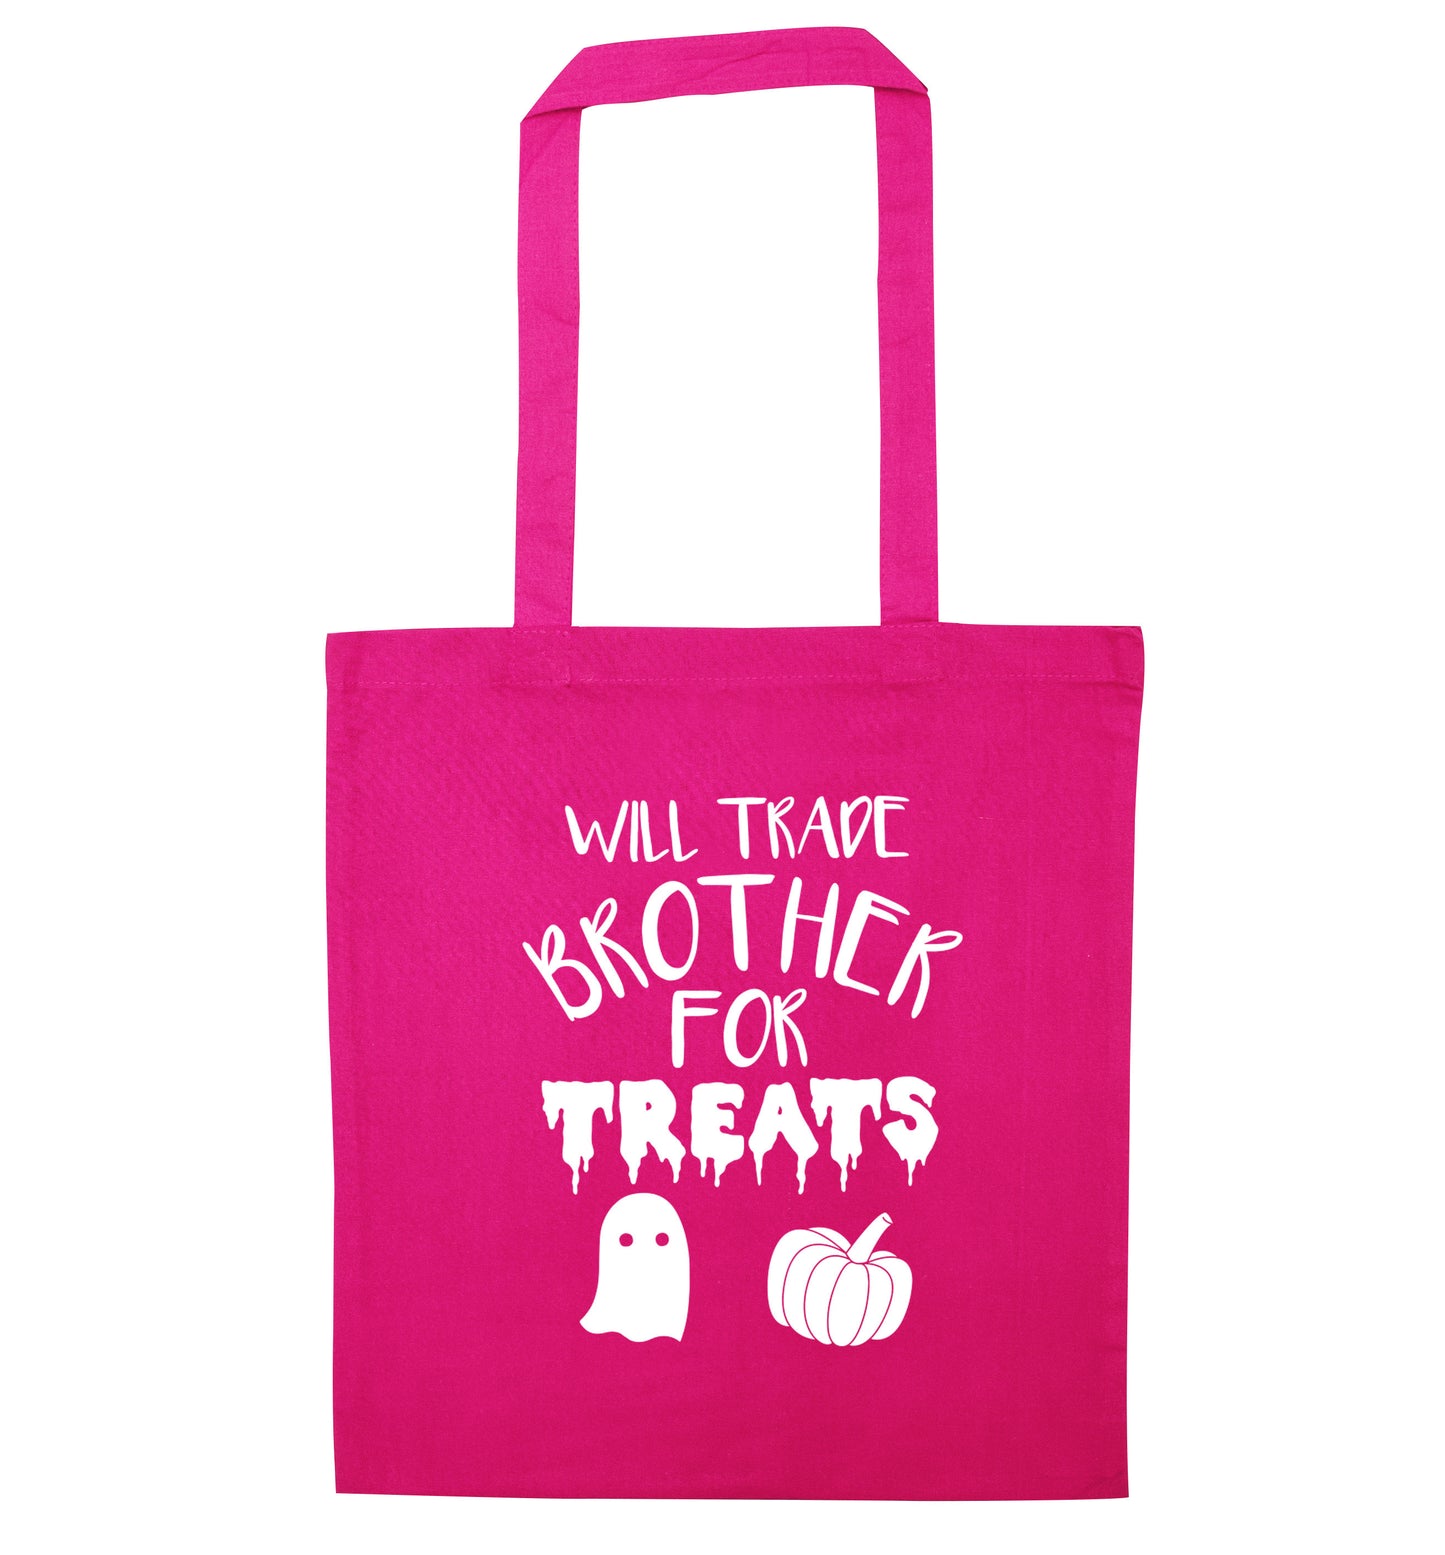 Will trade brother for treats pink tote bag